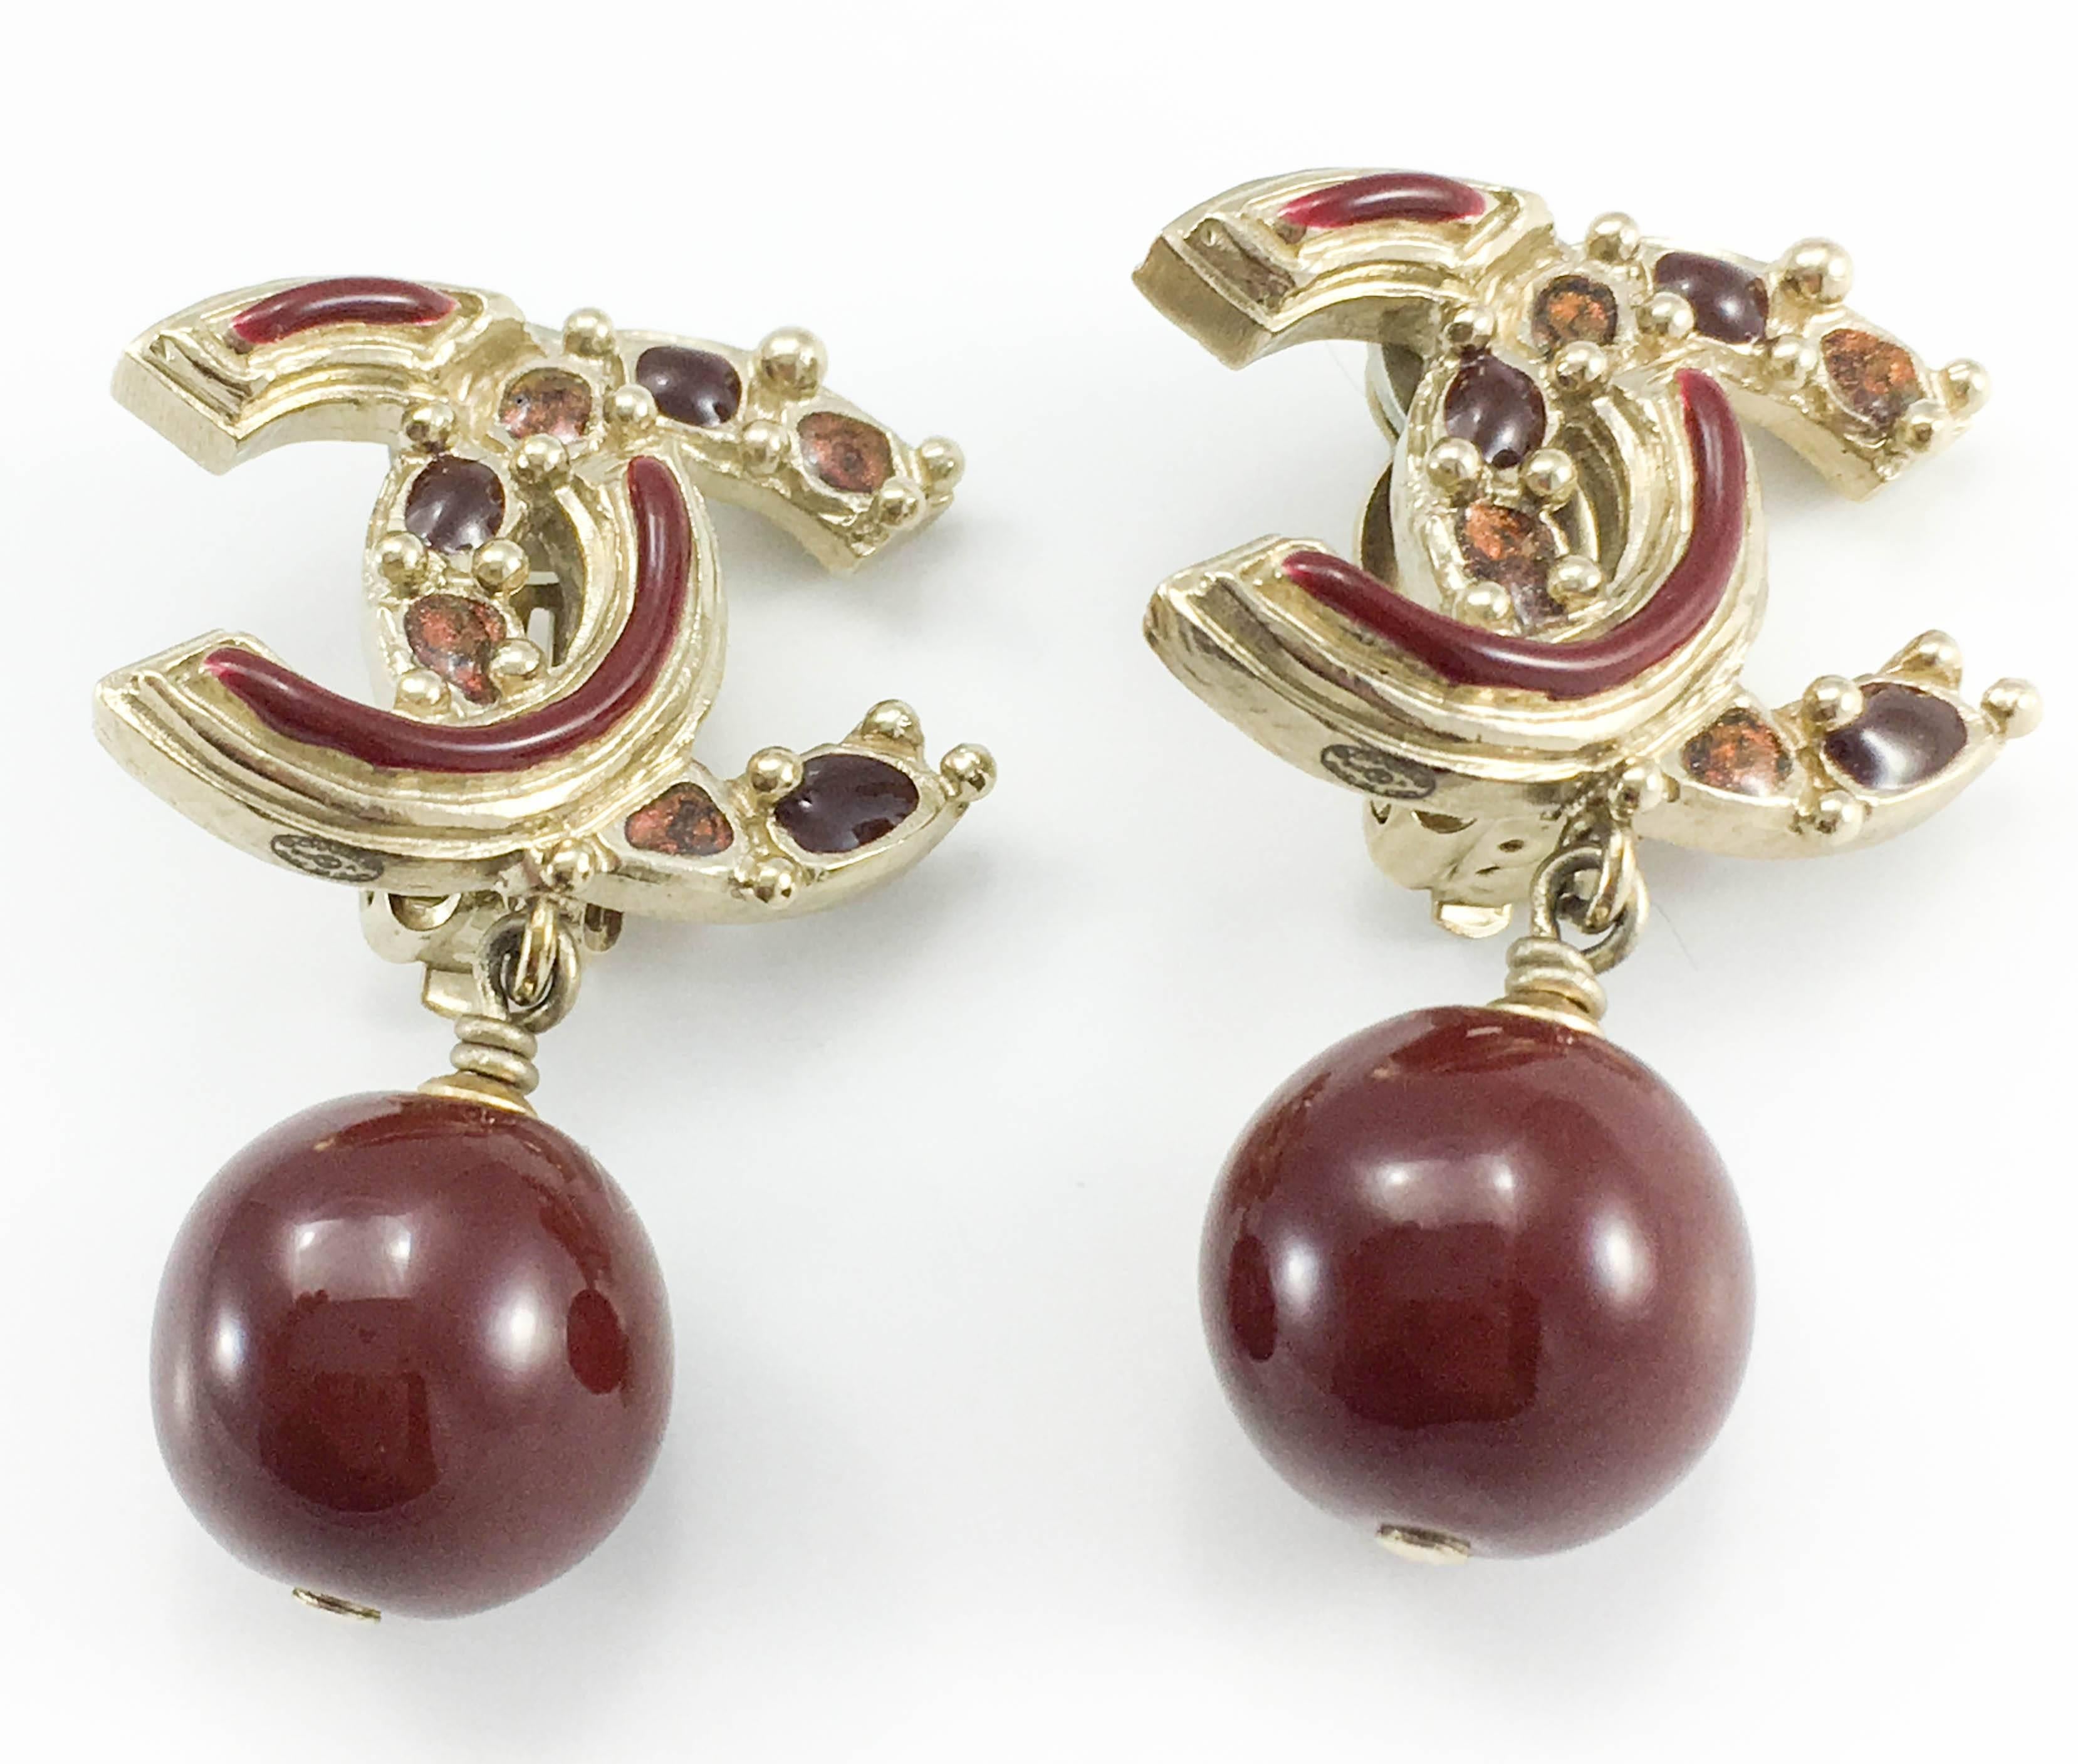 Women's Chanel Paris-Bombay Collection Red Gripoix Dangling Earrings - Circa 2012